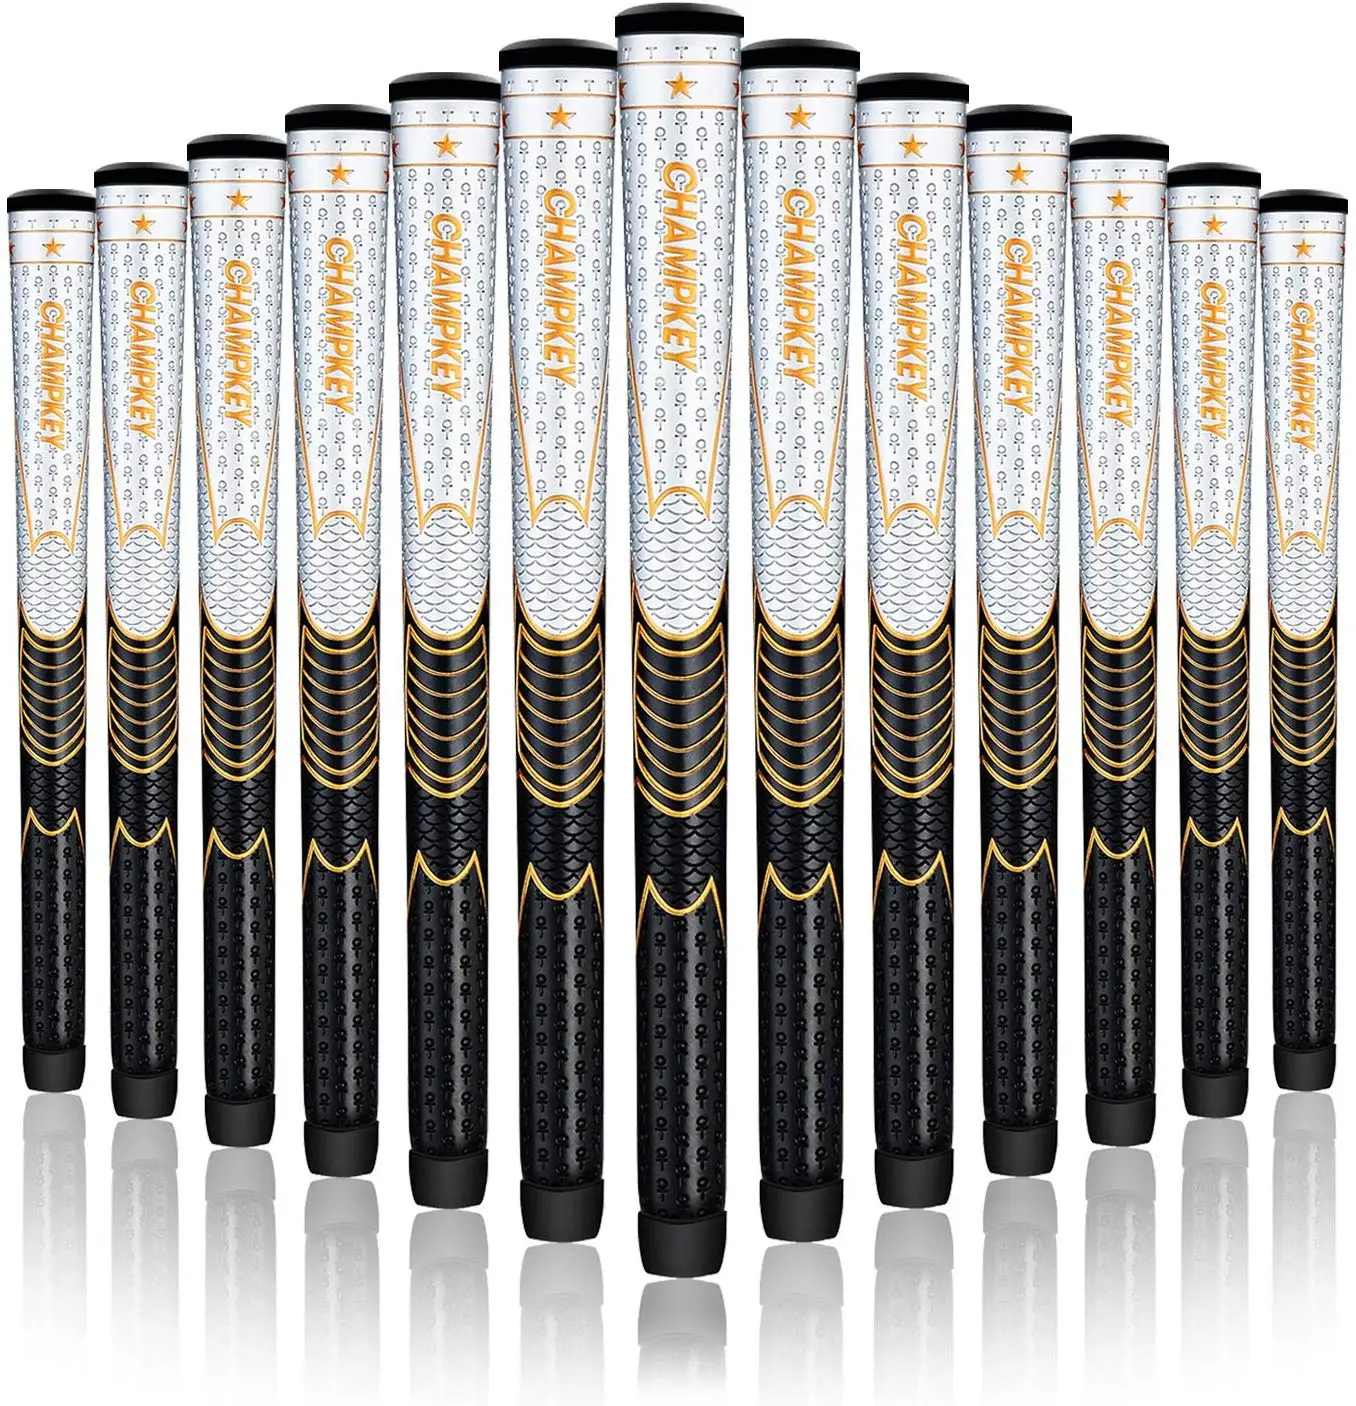 New 13-piece / Set CHAMPKEY High-tech PU Leather Golf Handle Oversize AVS Soft Golf Handle Available In A Variety of Colors